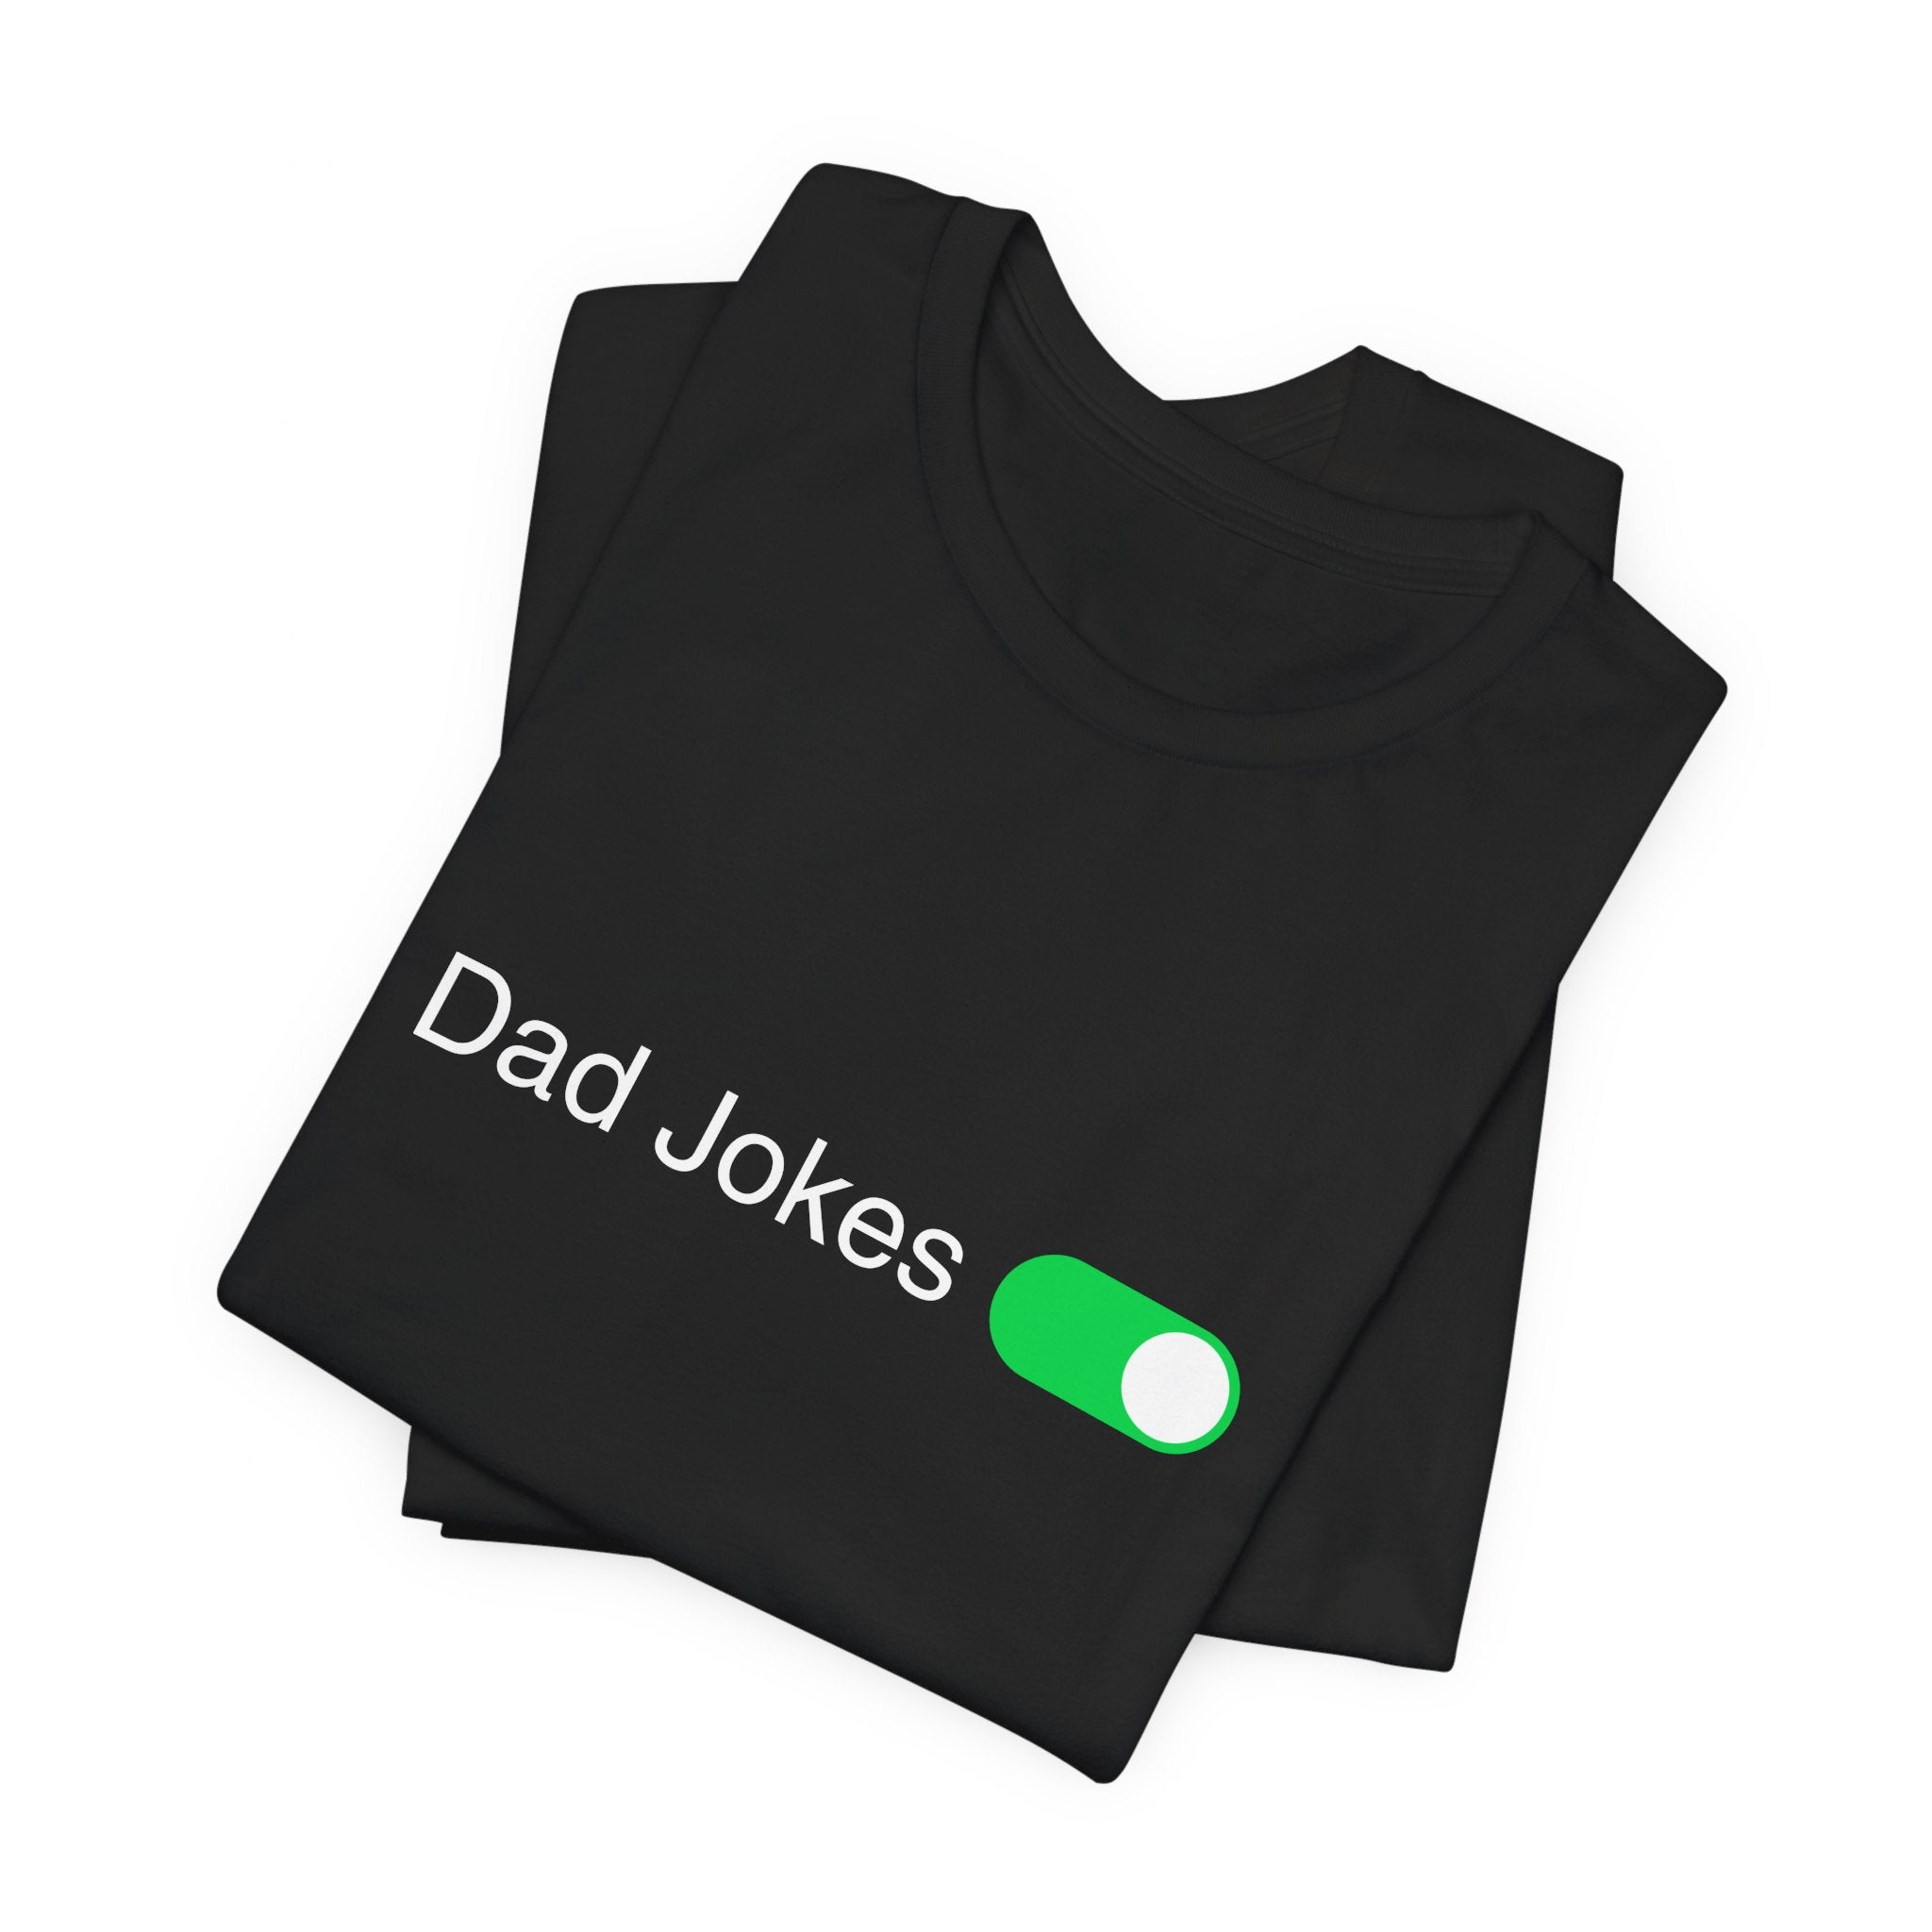 Dad Jokes On Shirt Funny Father’s Day Tee